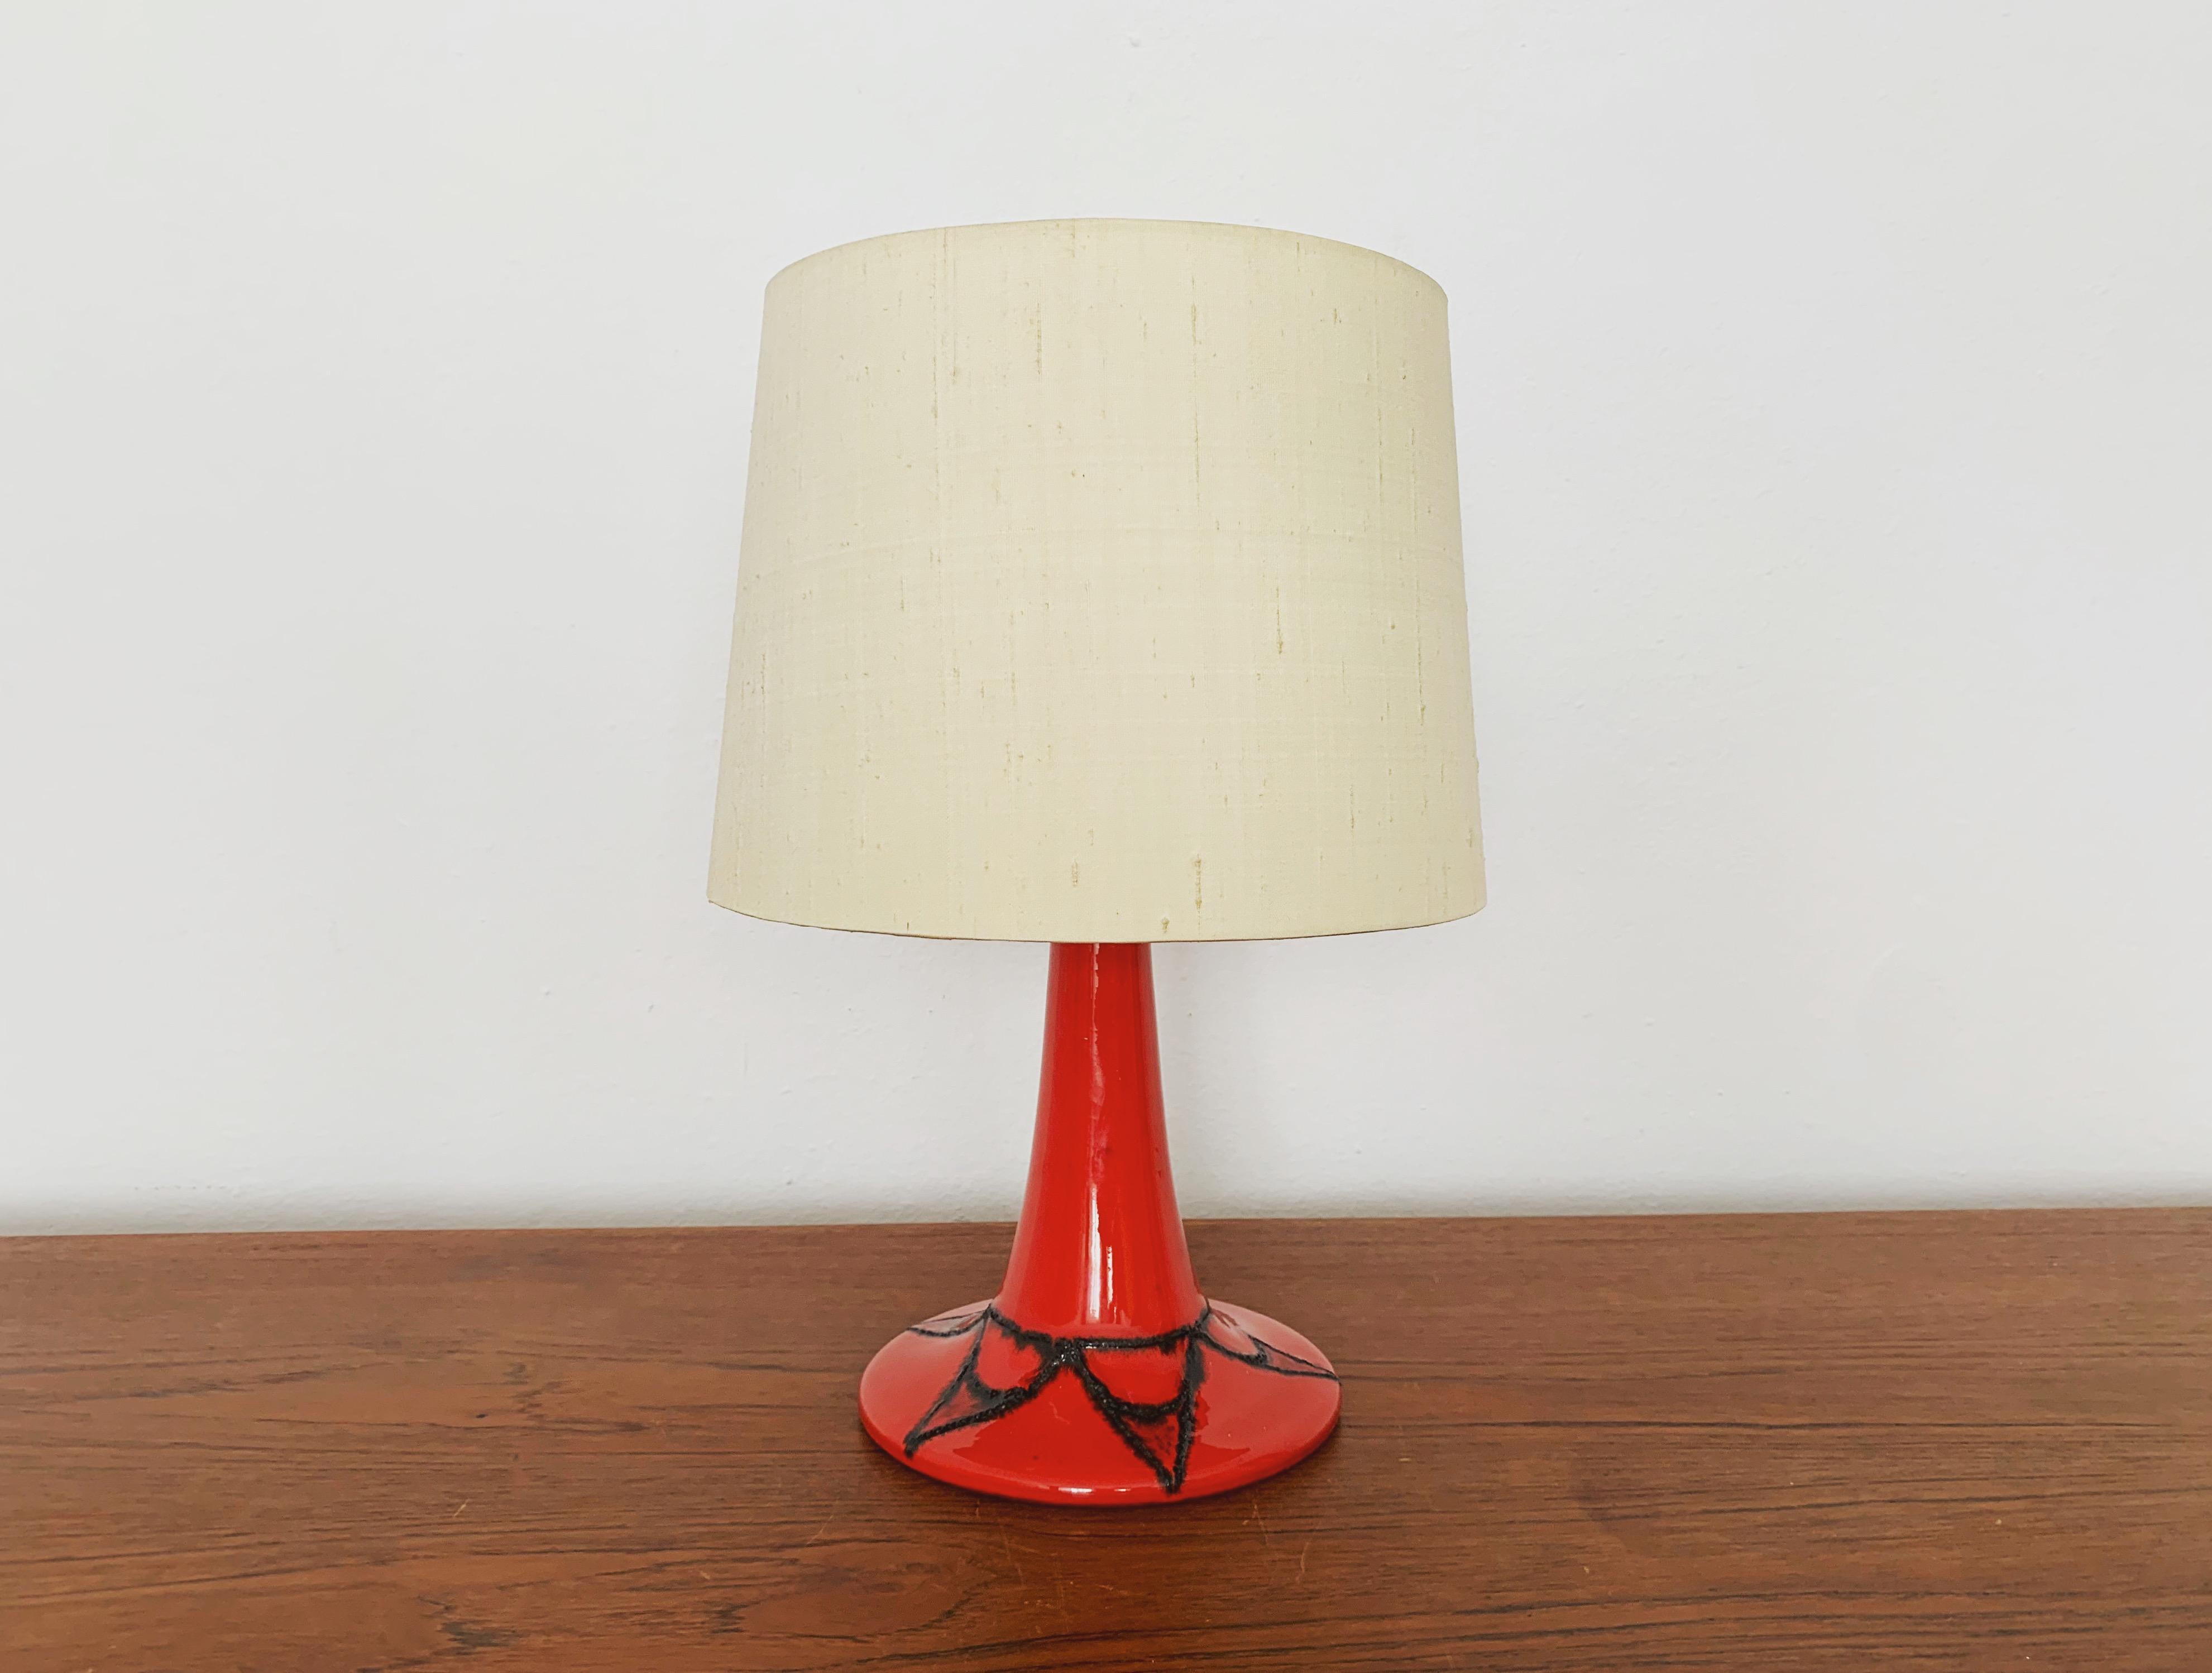 Beautiful table lamp from the 1960s.
The lamp has a great structure and is beautifully designed.
Very high quality workmanship and fantastic design.

Condition:

Very good vintage condition with minimal signs of wear consistent with